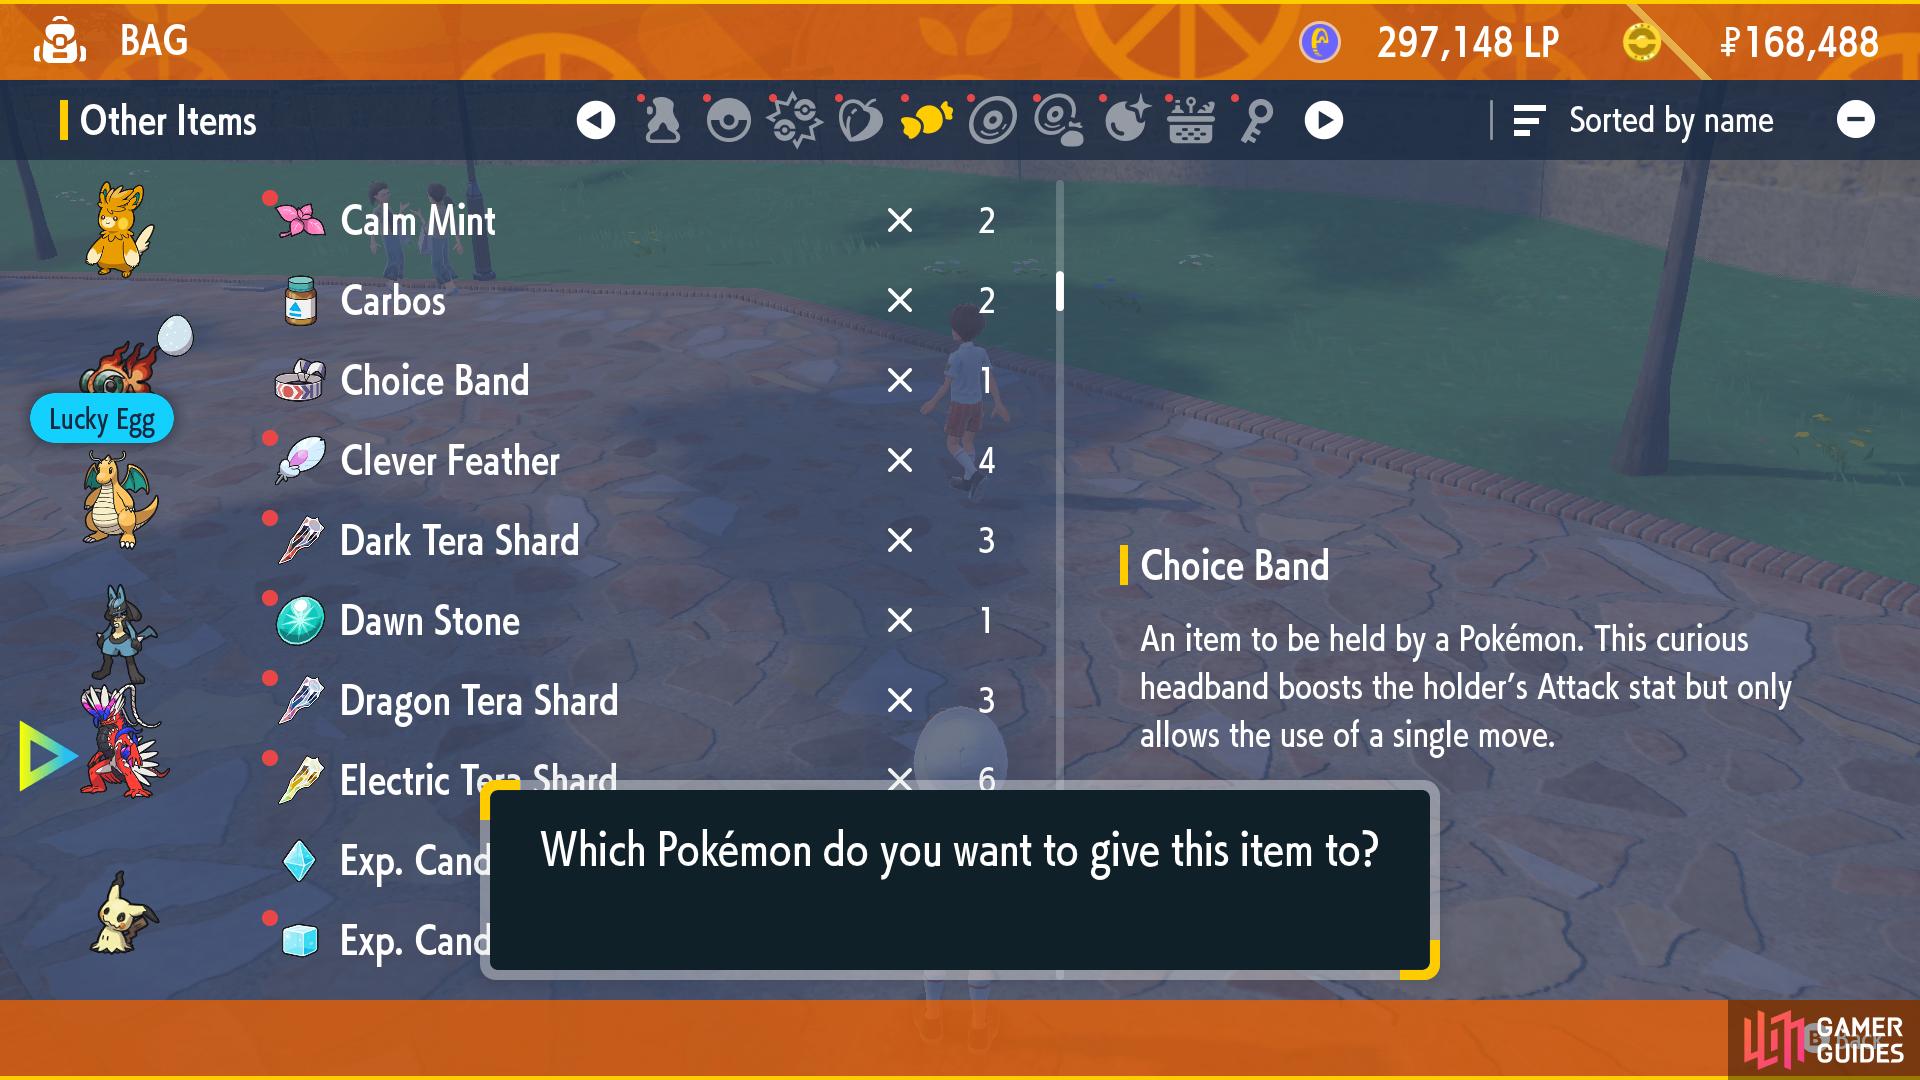 Choice Band boosts Attack, but only allows one move to be used.